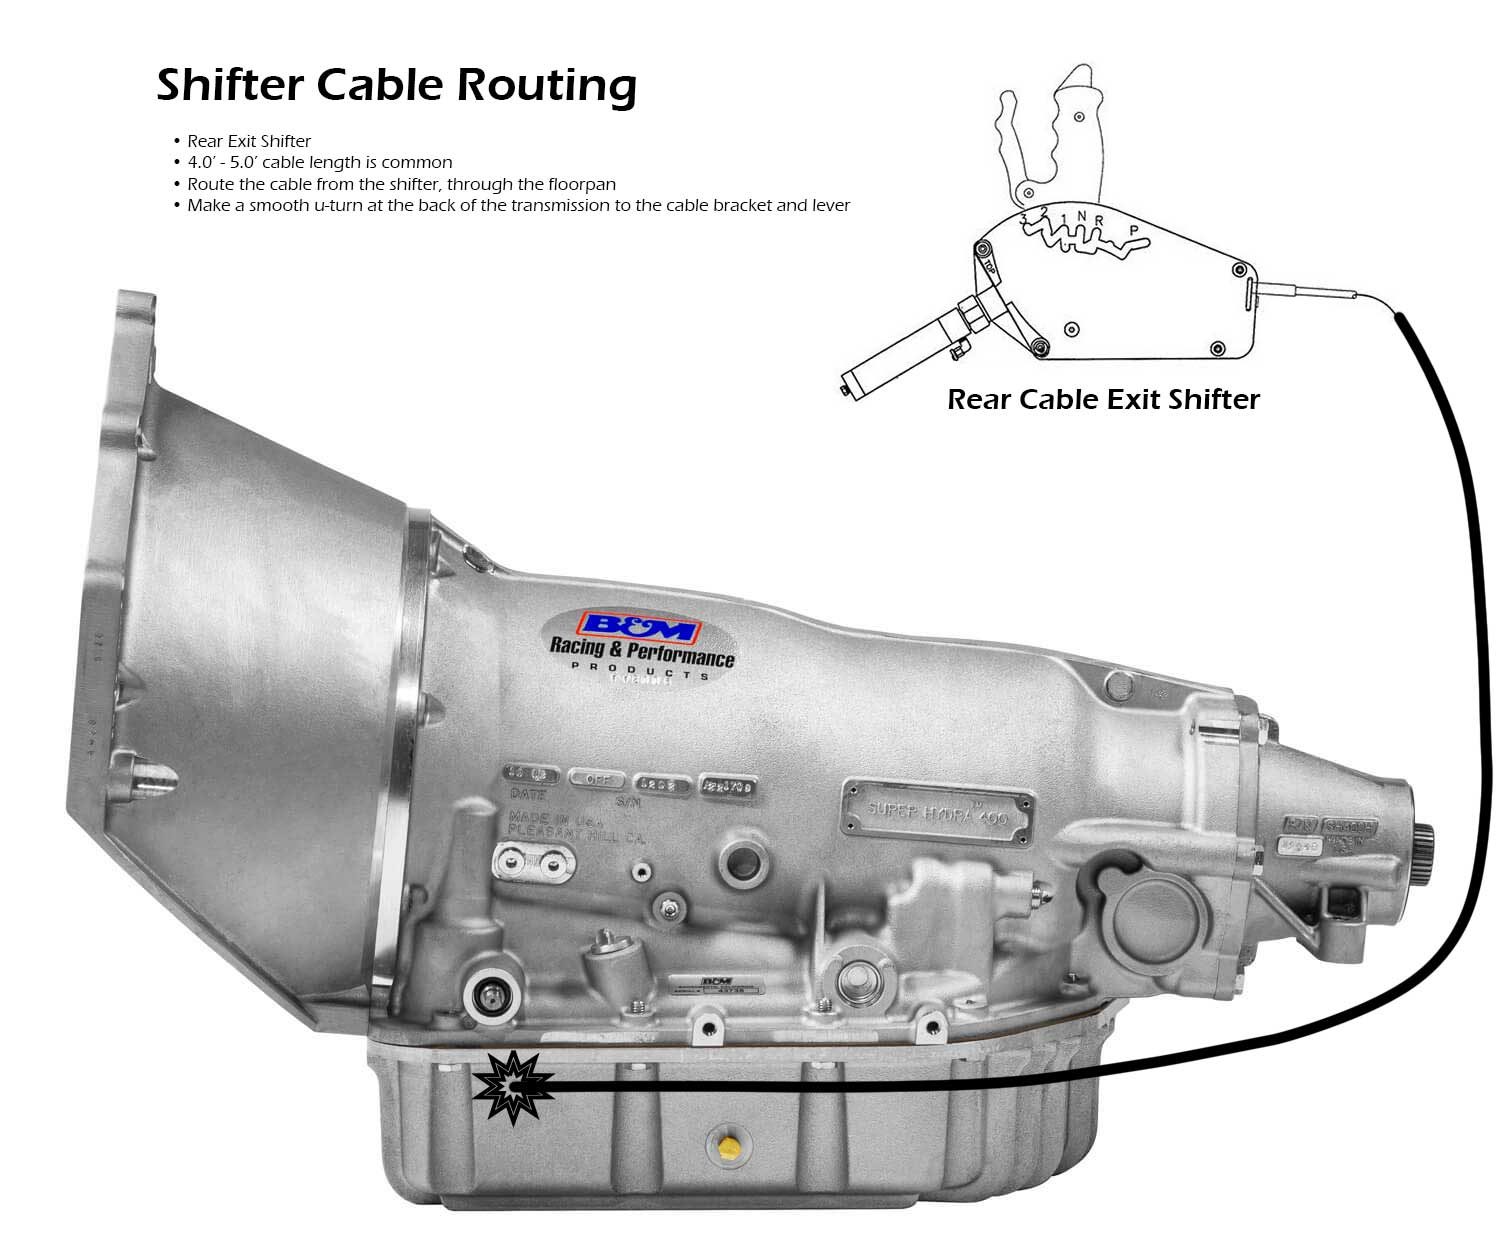 Shifter Cable Routing - Rear Exit